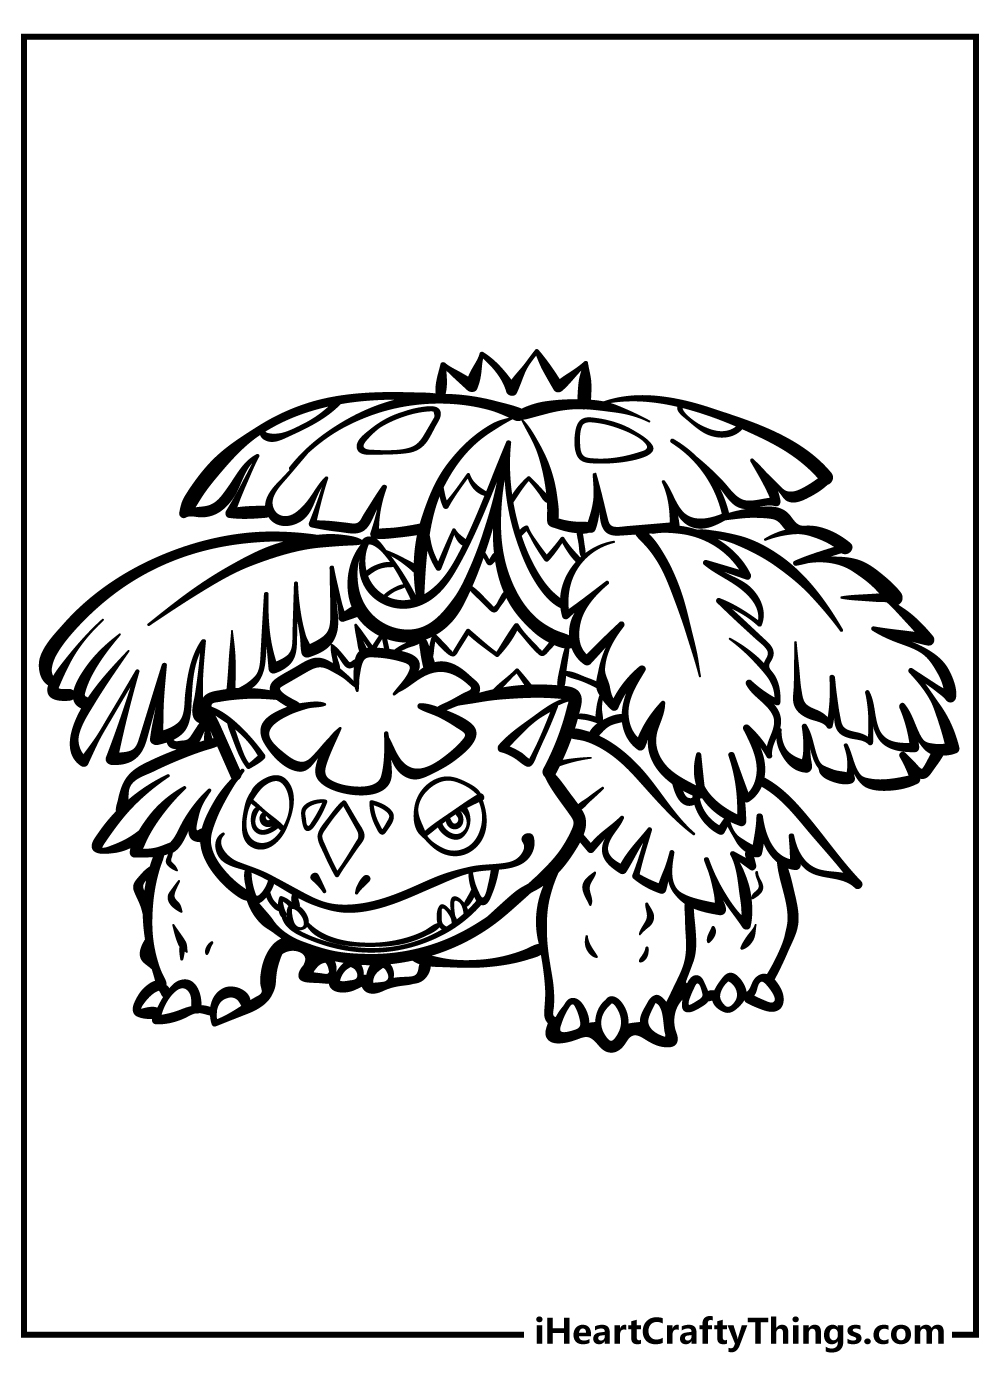 Mega Pokemon Coloring Pages for adults free printable